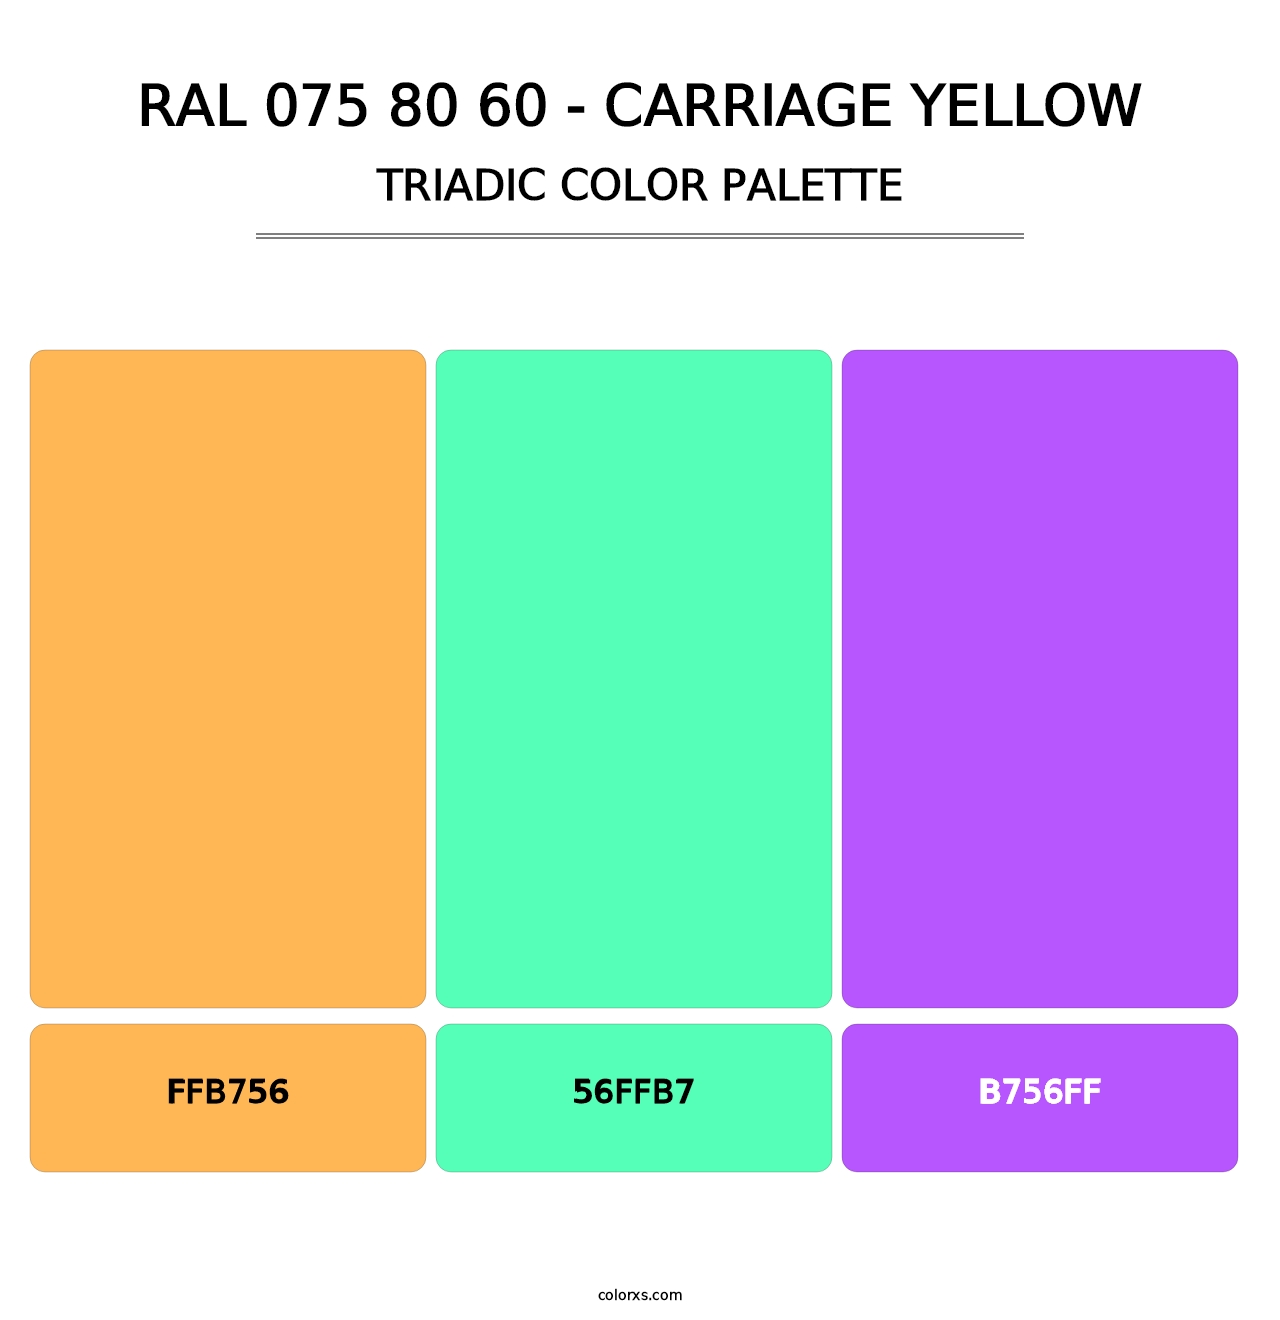 RAL 075 80 60 - Carriage Yellow - Triadic Color Palette